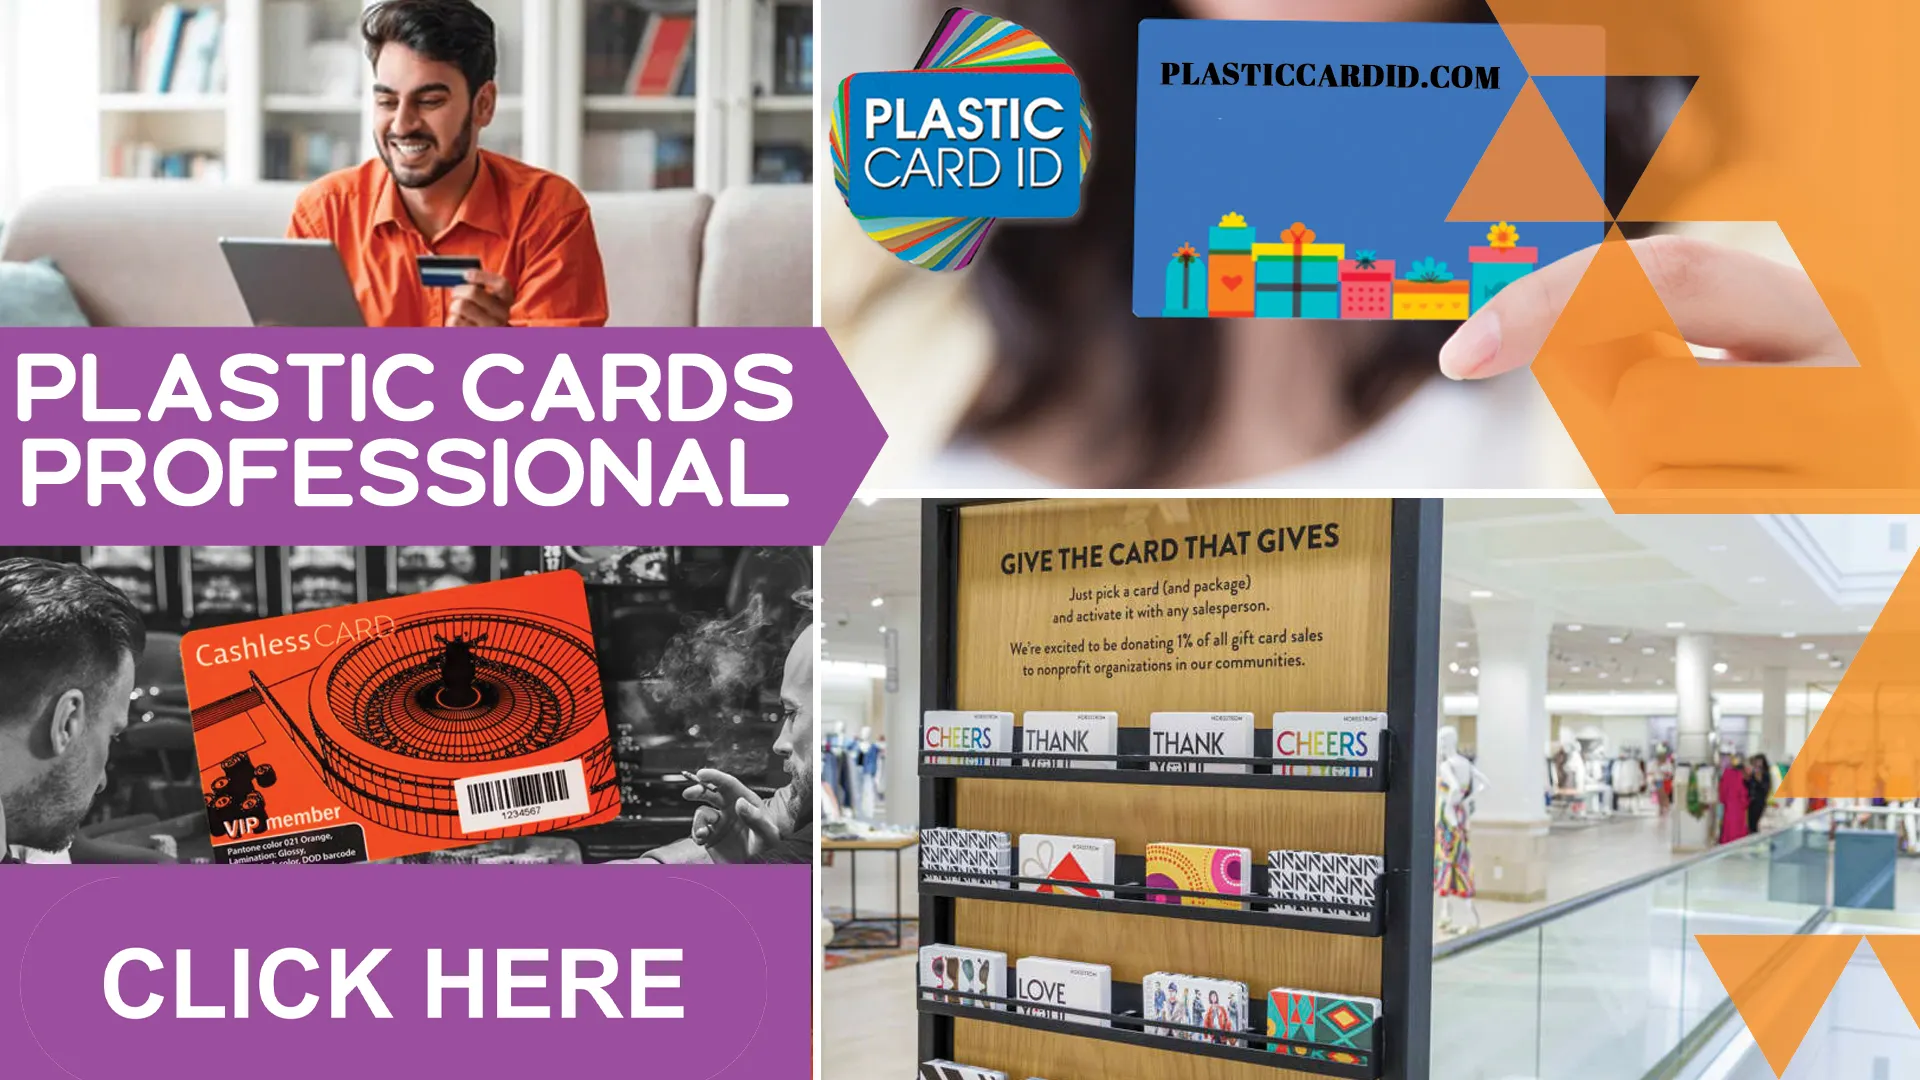 Our Card Range: Meeting Your Needs Across the Board